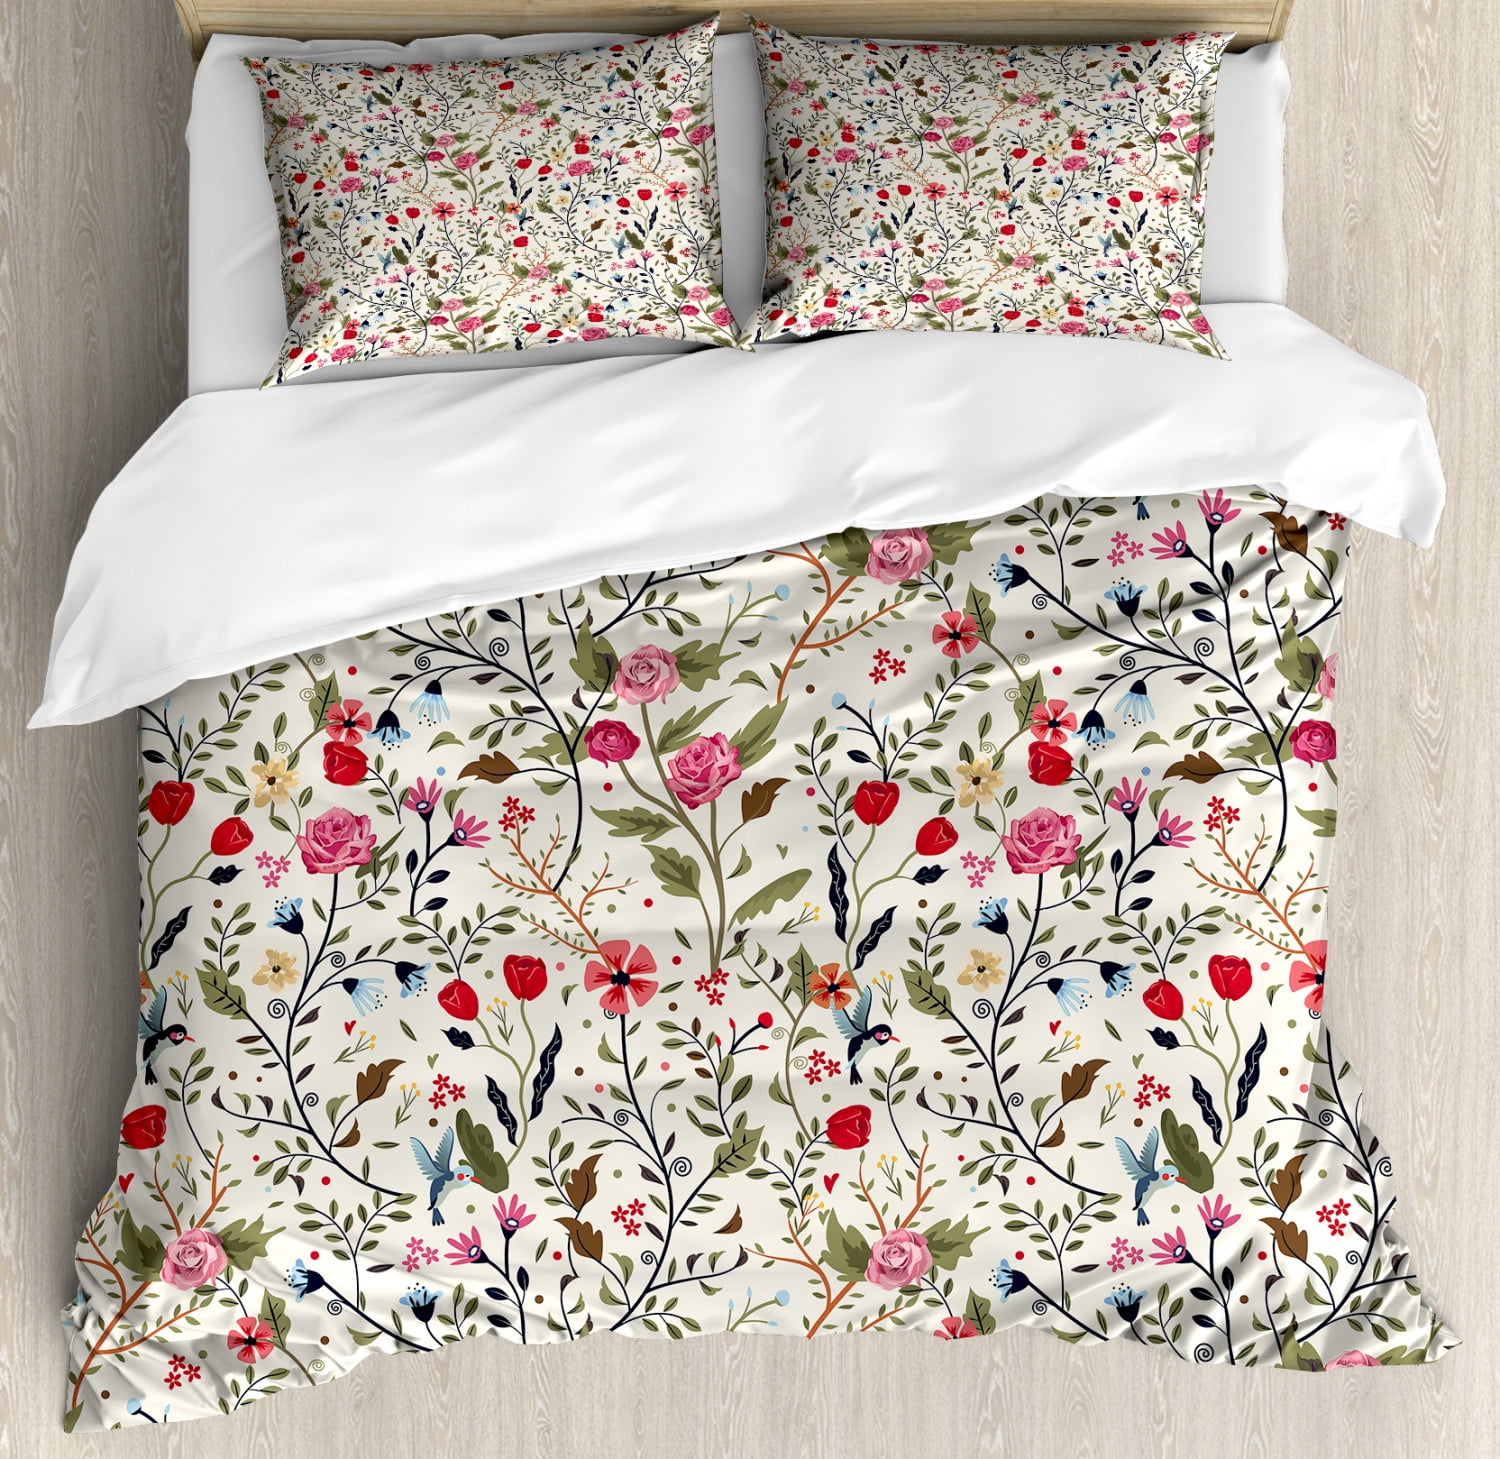 3PC BED DUVET COVER SET MEN WOMEN DESIGNS FLORAL COUNTRY IN 3 SIZES W/PILLOWCASE 